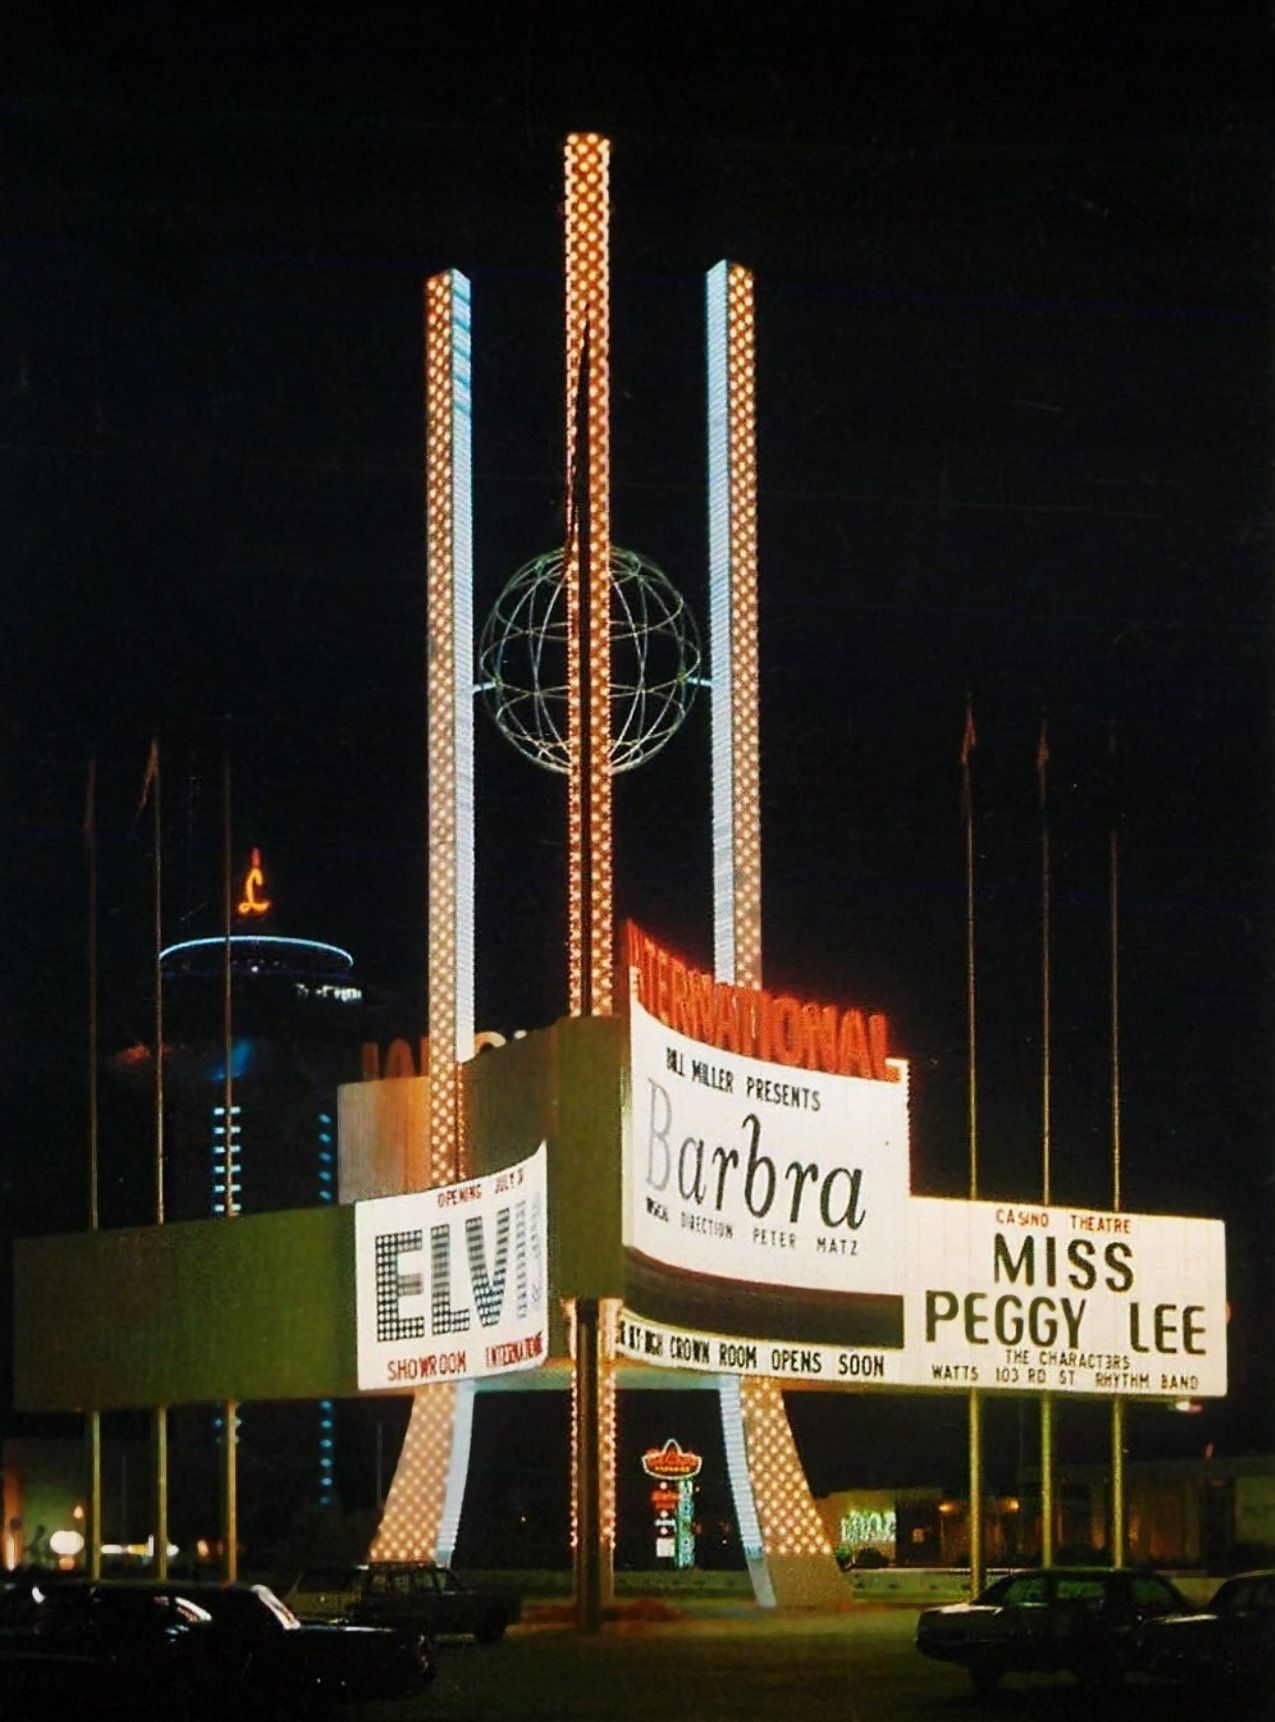 Marquee with Streisand's name at the International Hotel, Las Vegas.